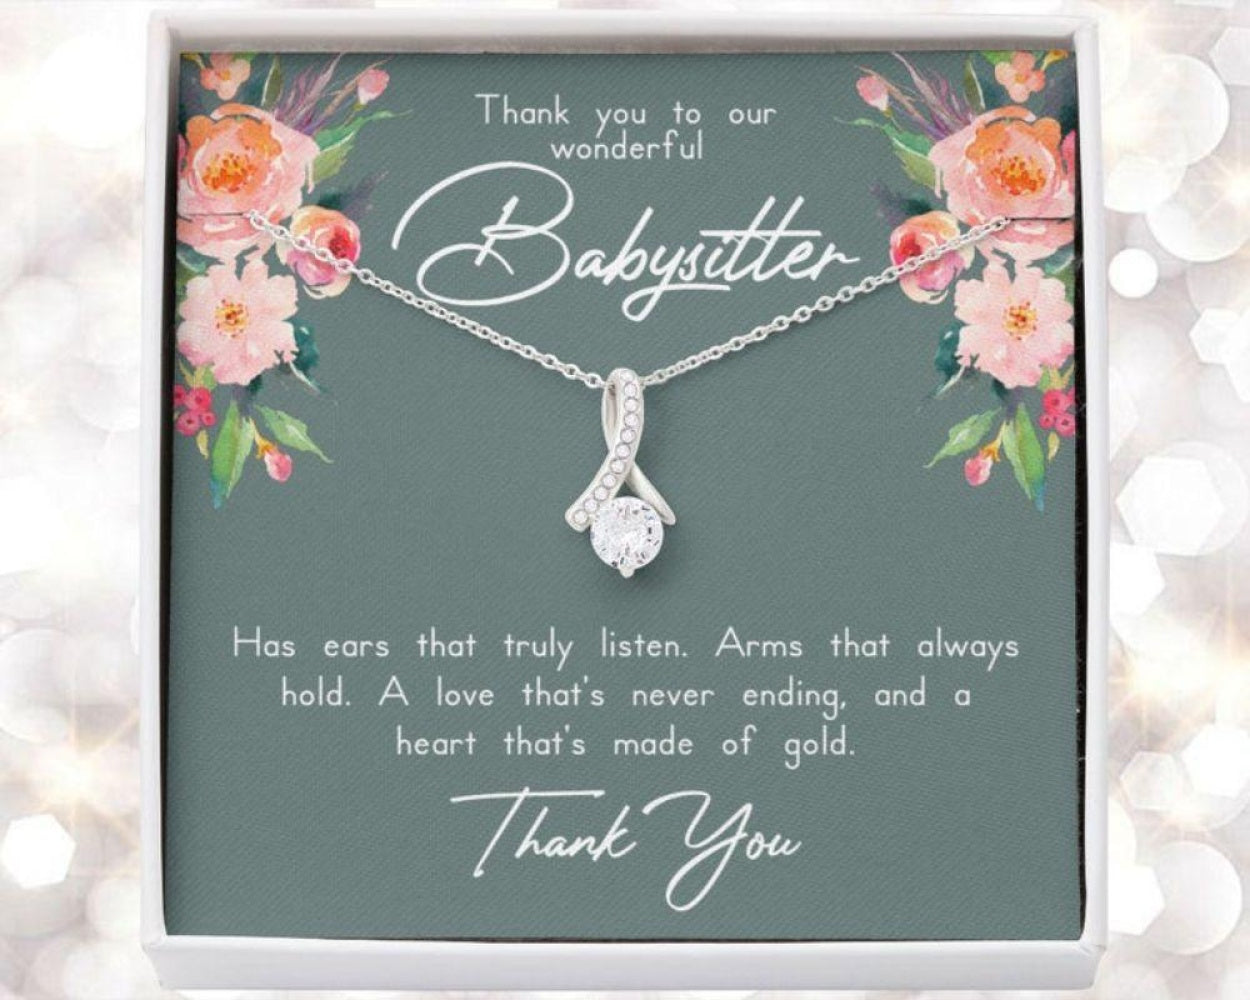 Babysitter Necklace Gifts, Nanny Gifts, Babysitter, Care Taker Thank You Necklace